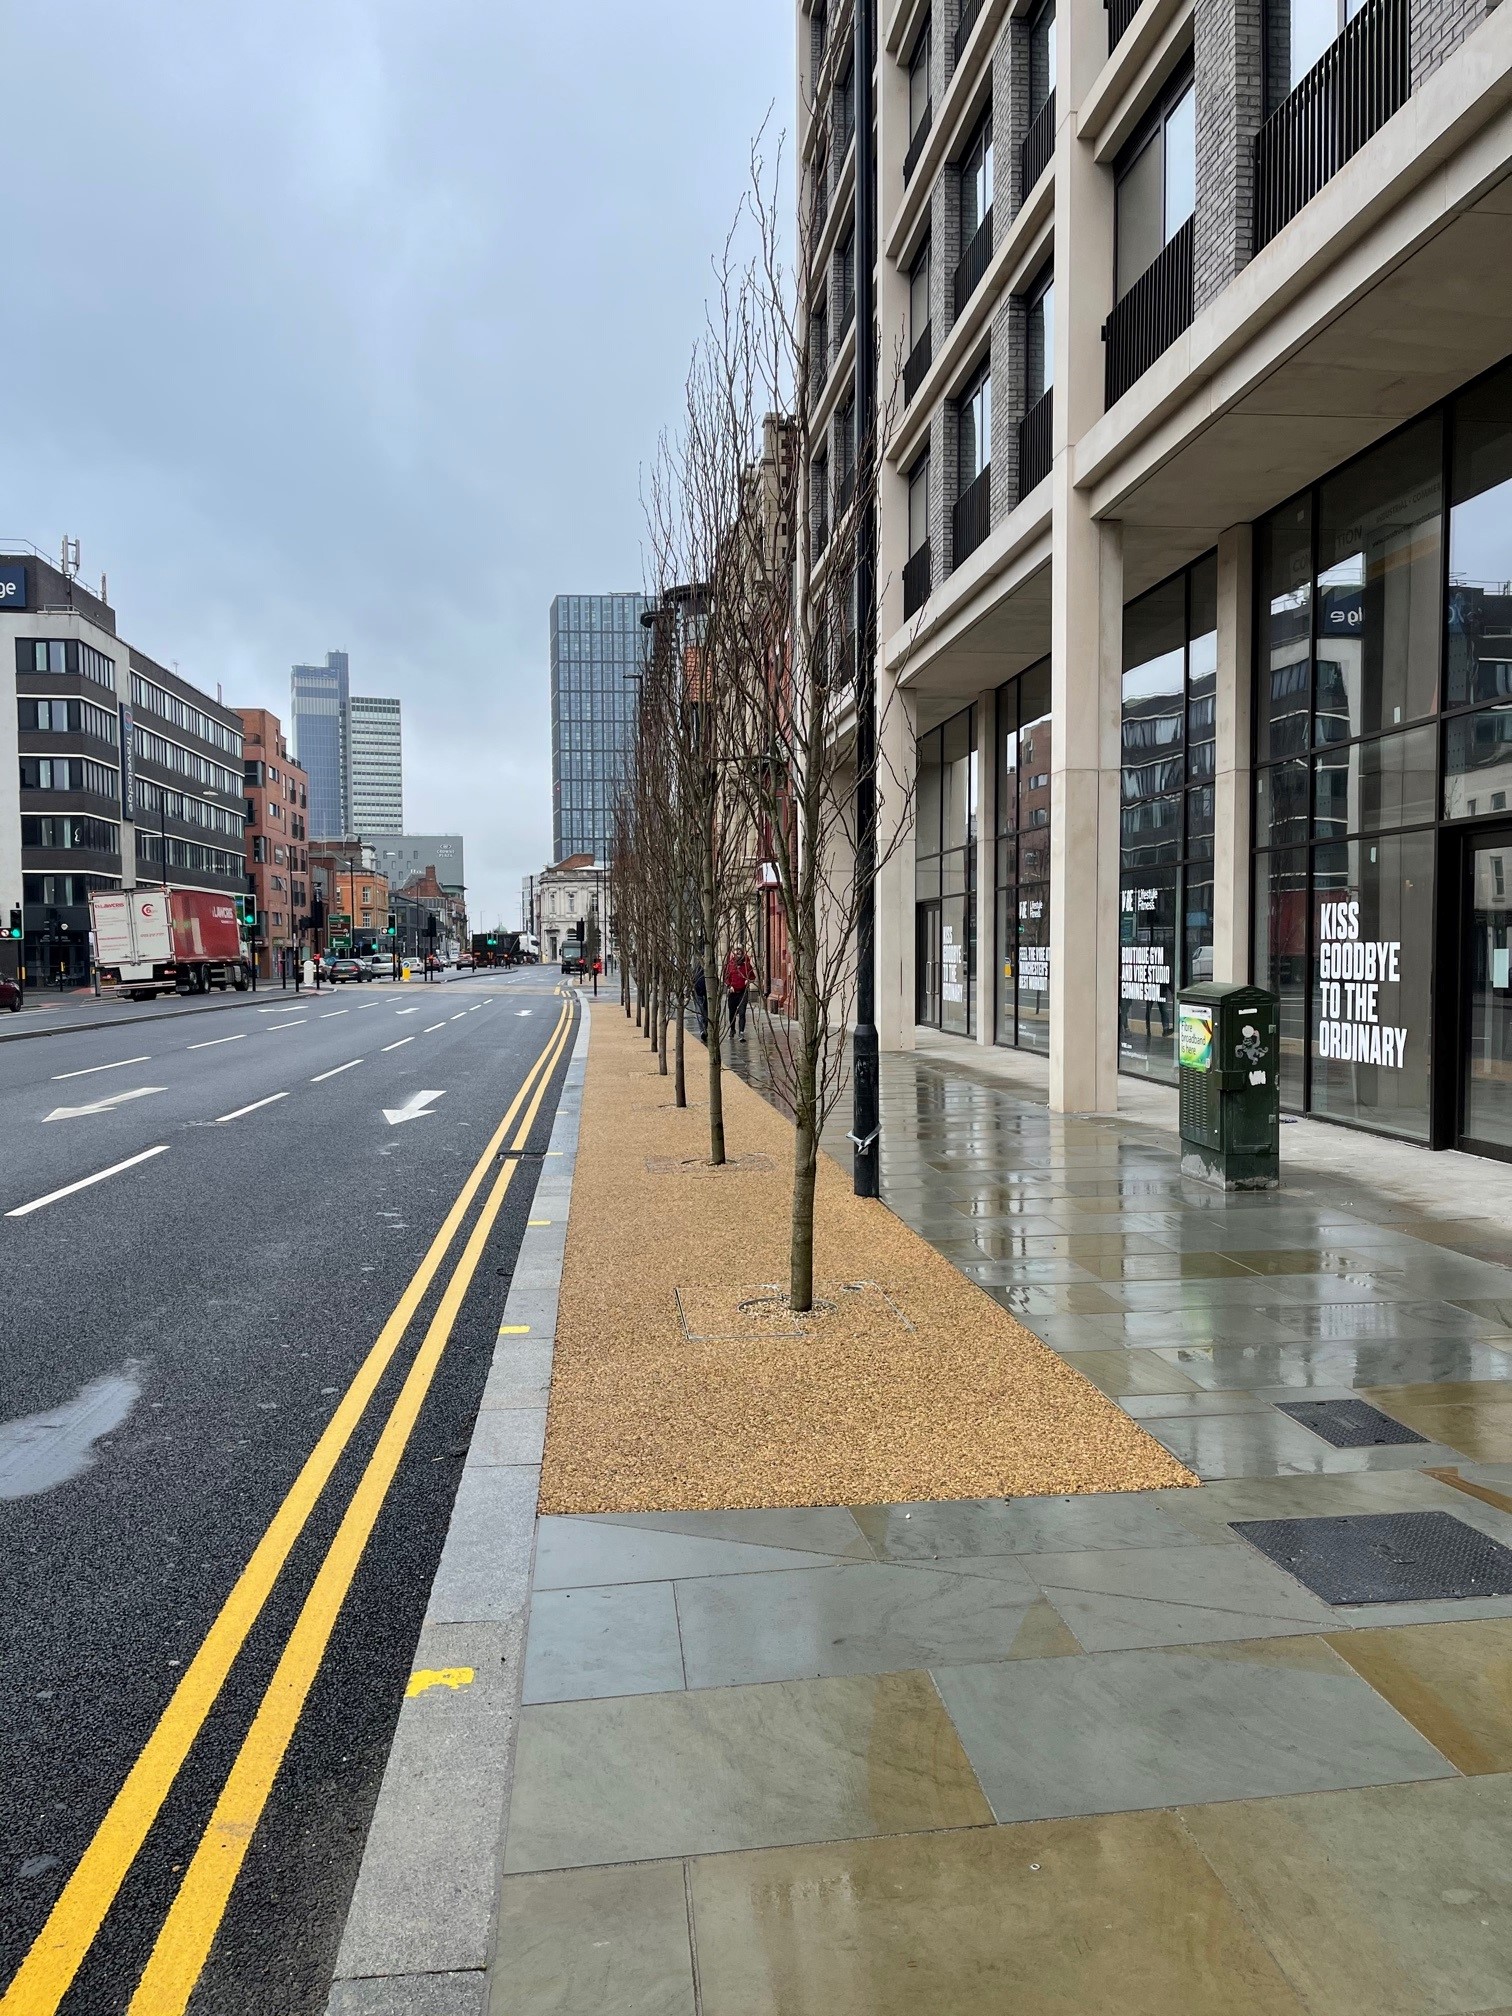 Green-tech use soil conditioning technology for prestigious Manchester ring road planting scheme